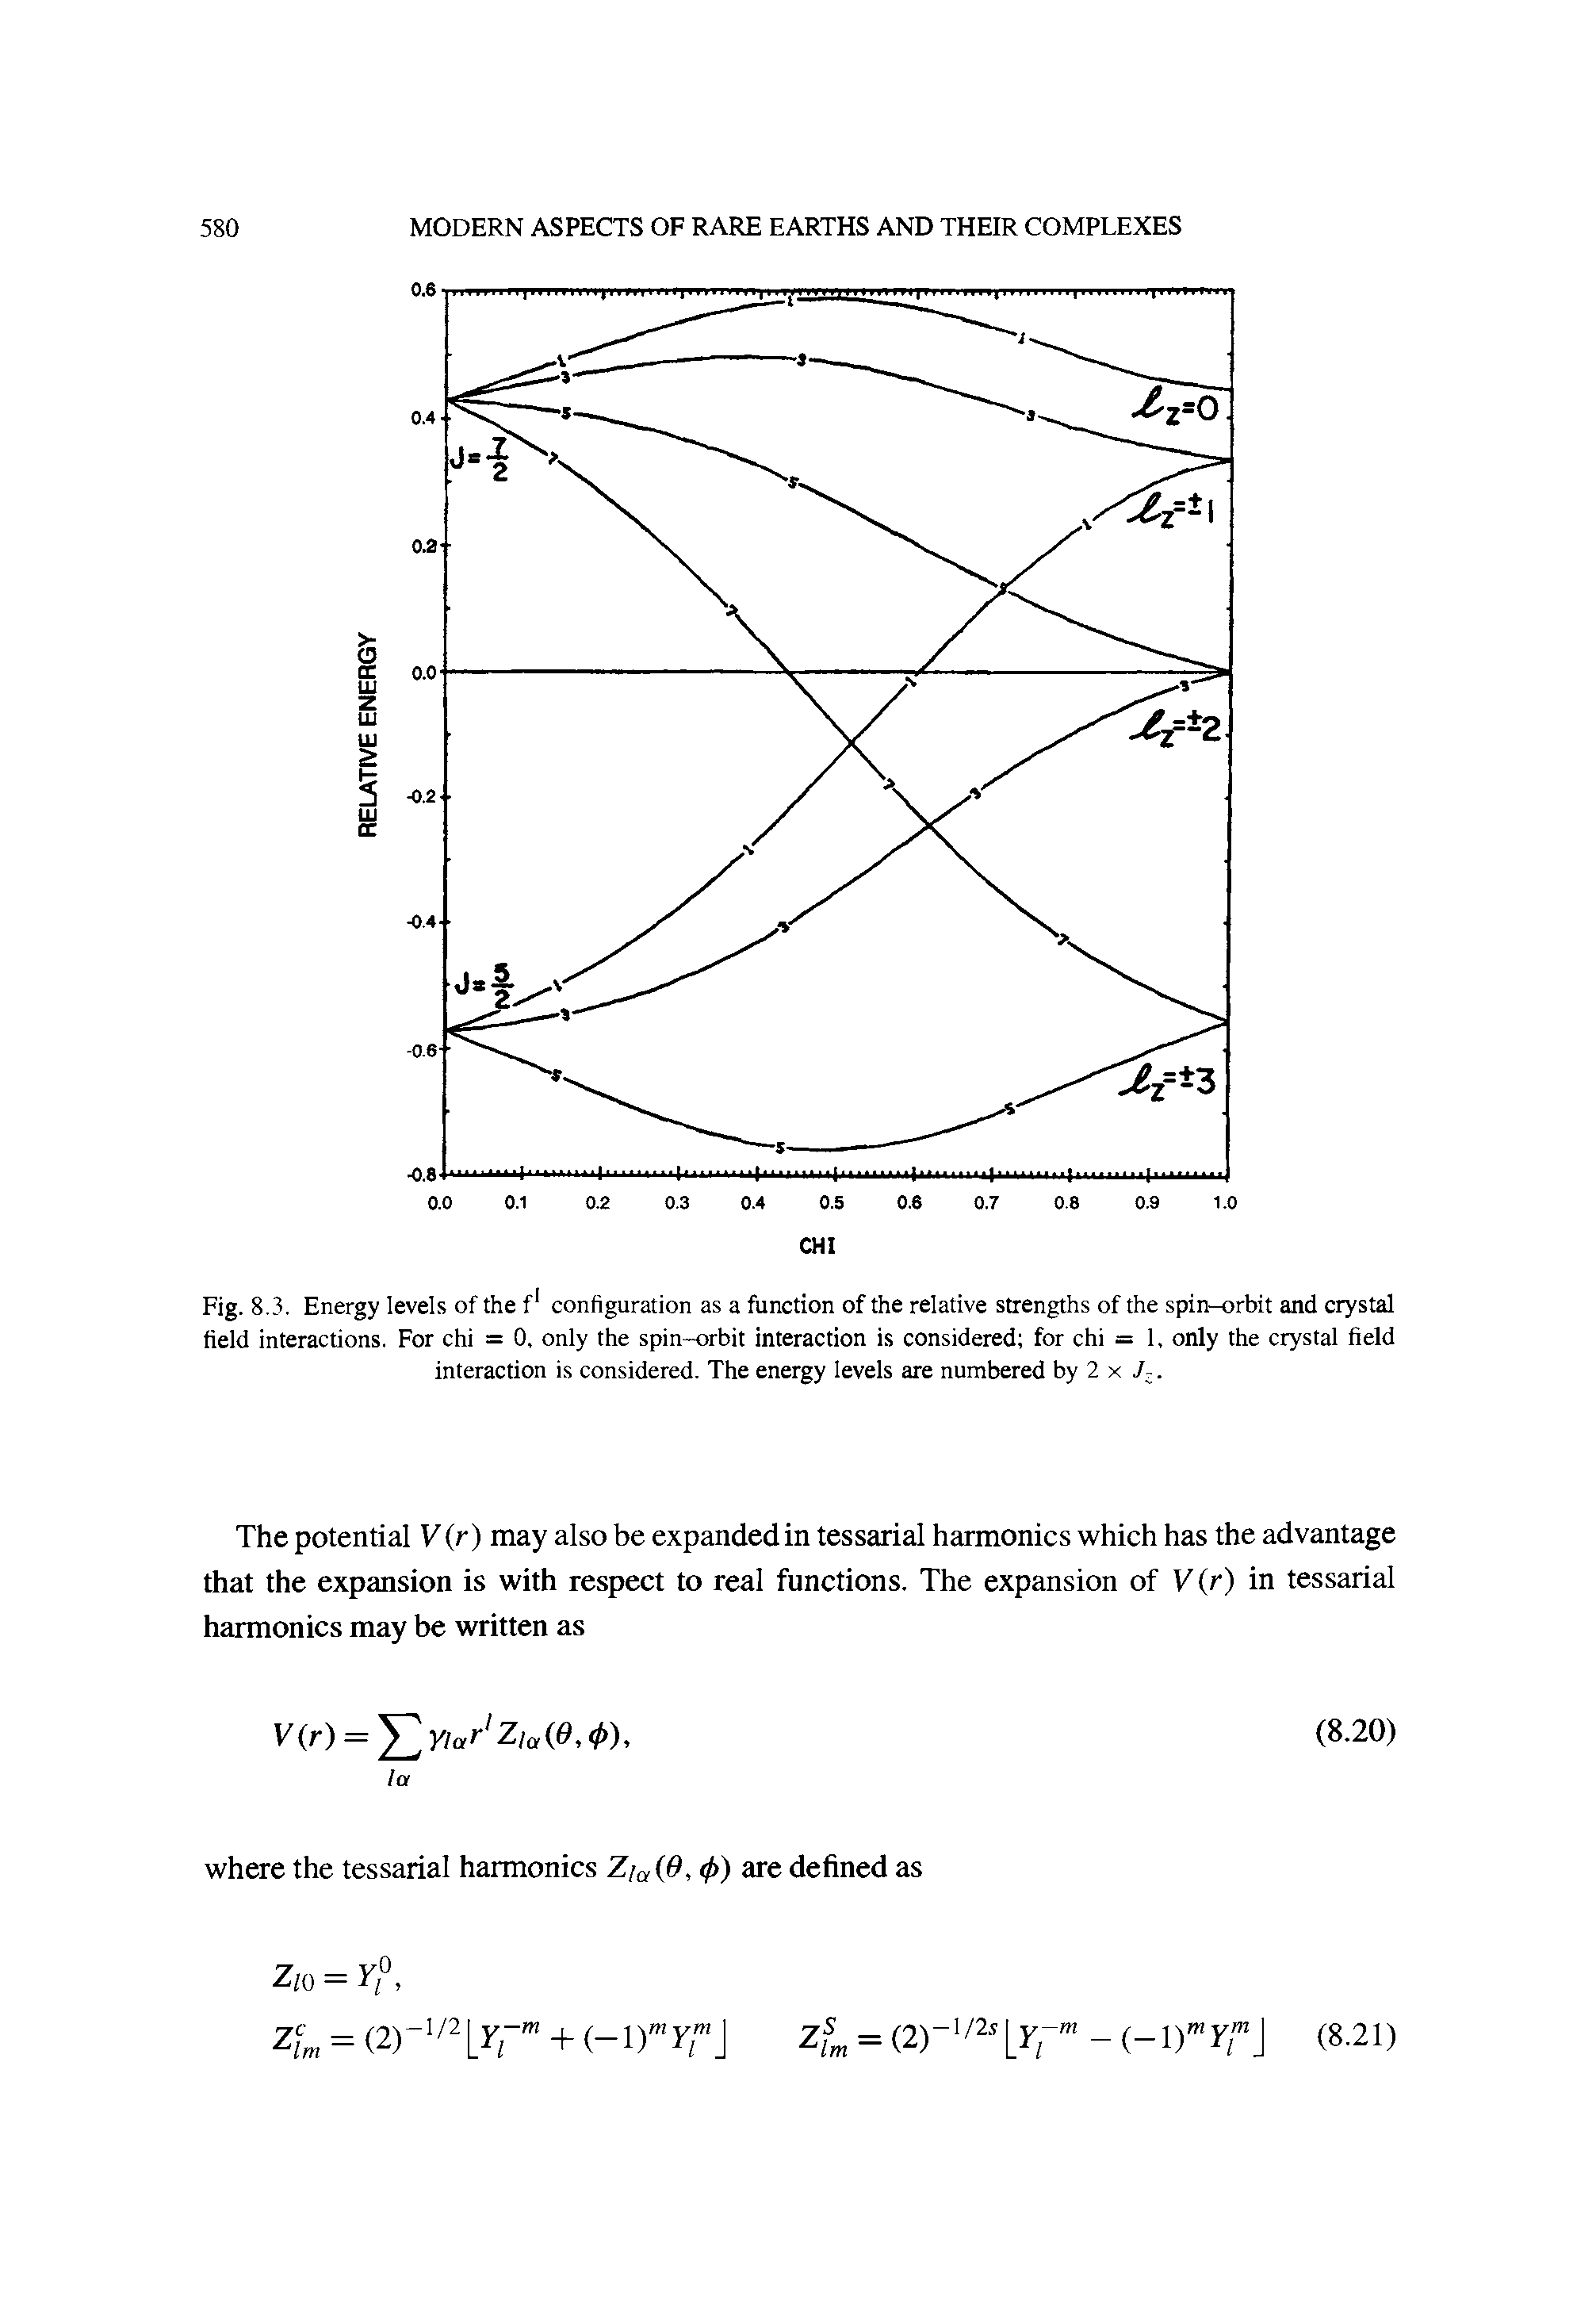 Fig. 8.3. Energy levels of the f1 configuration as a function of the relative strengths of the spin-orbit and crystal field interactions. For chi = 0, only the spin-orbit interaction is considered for chi = 1, only the crystal field interaction is considered. The energy levels are numbered by 2 x L.